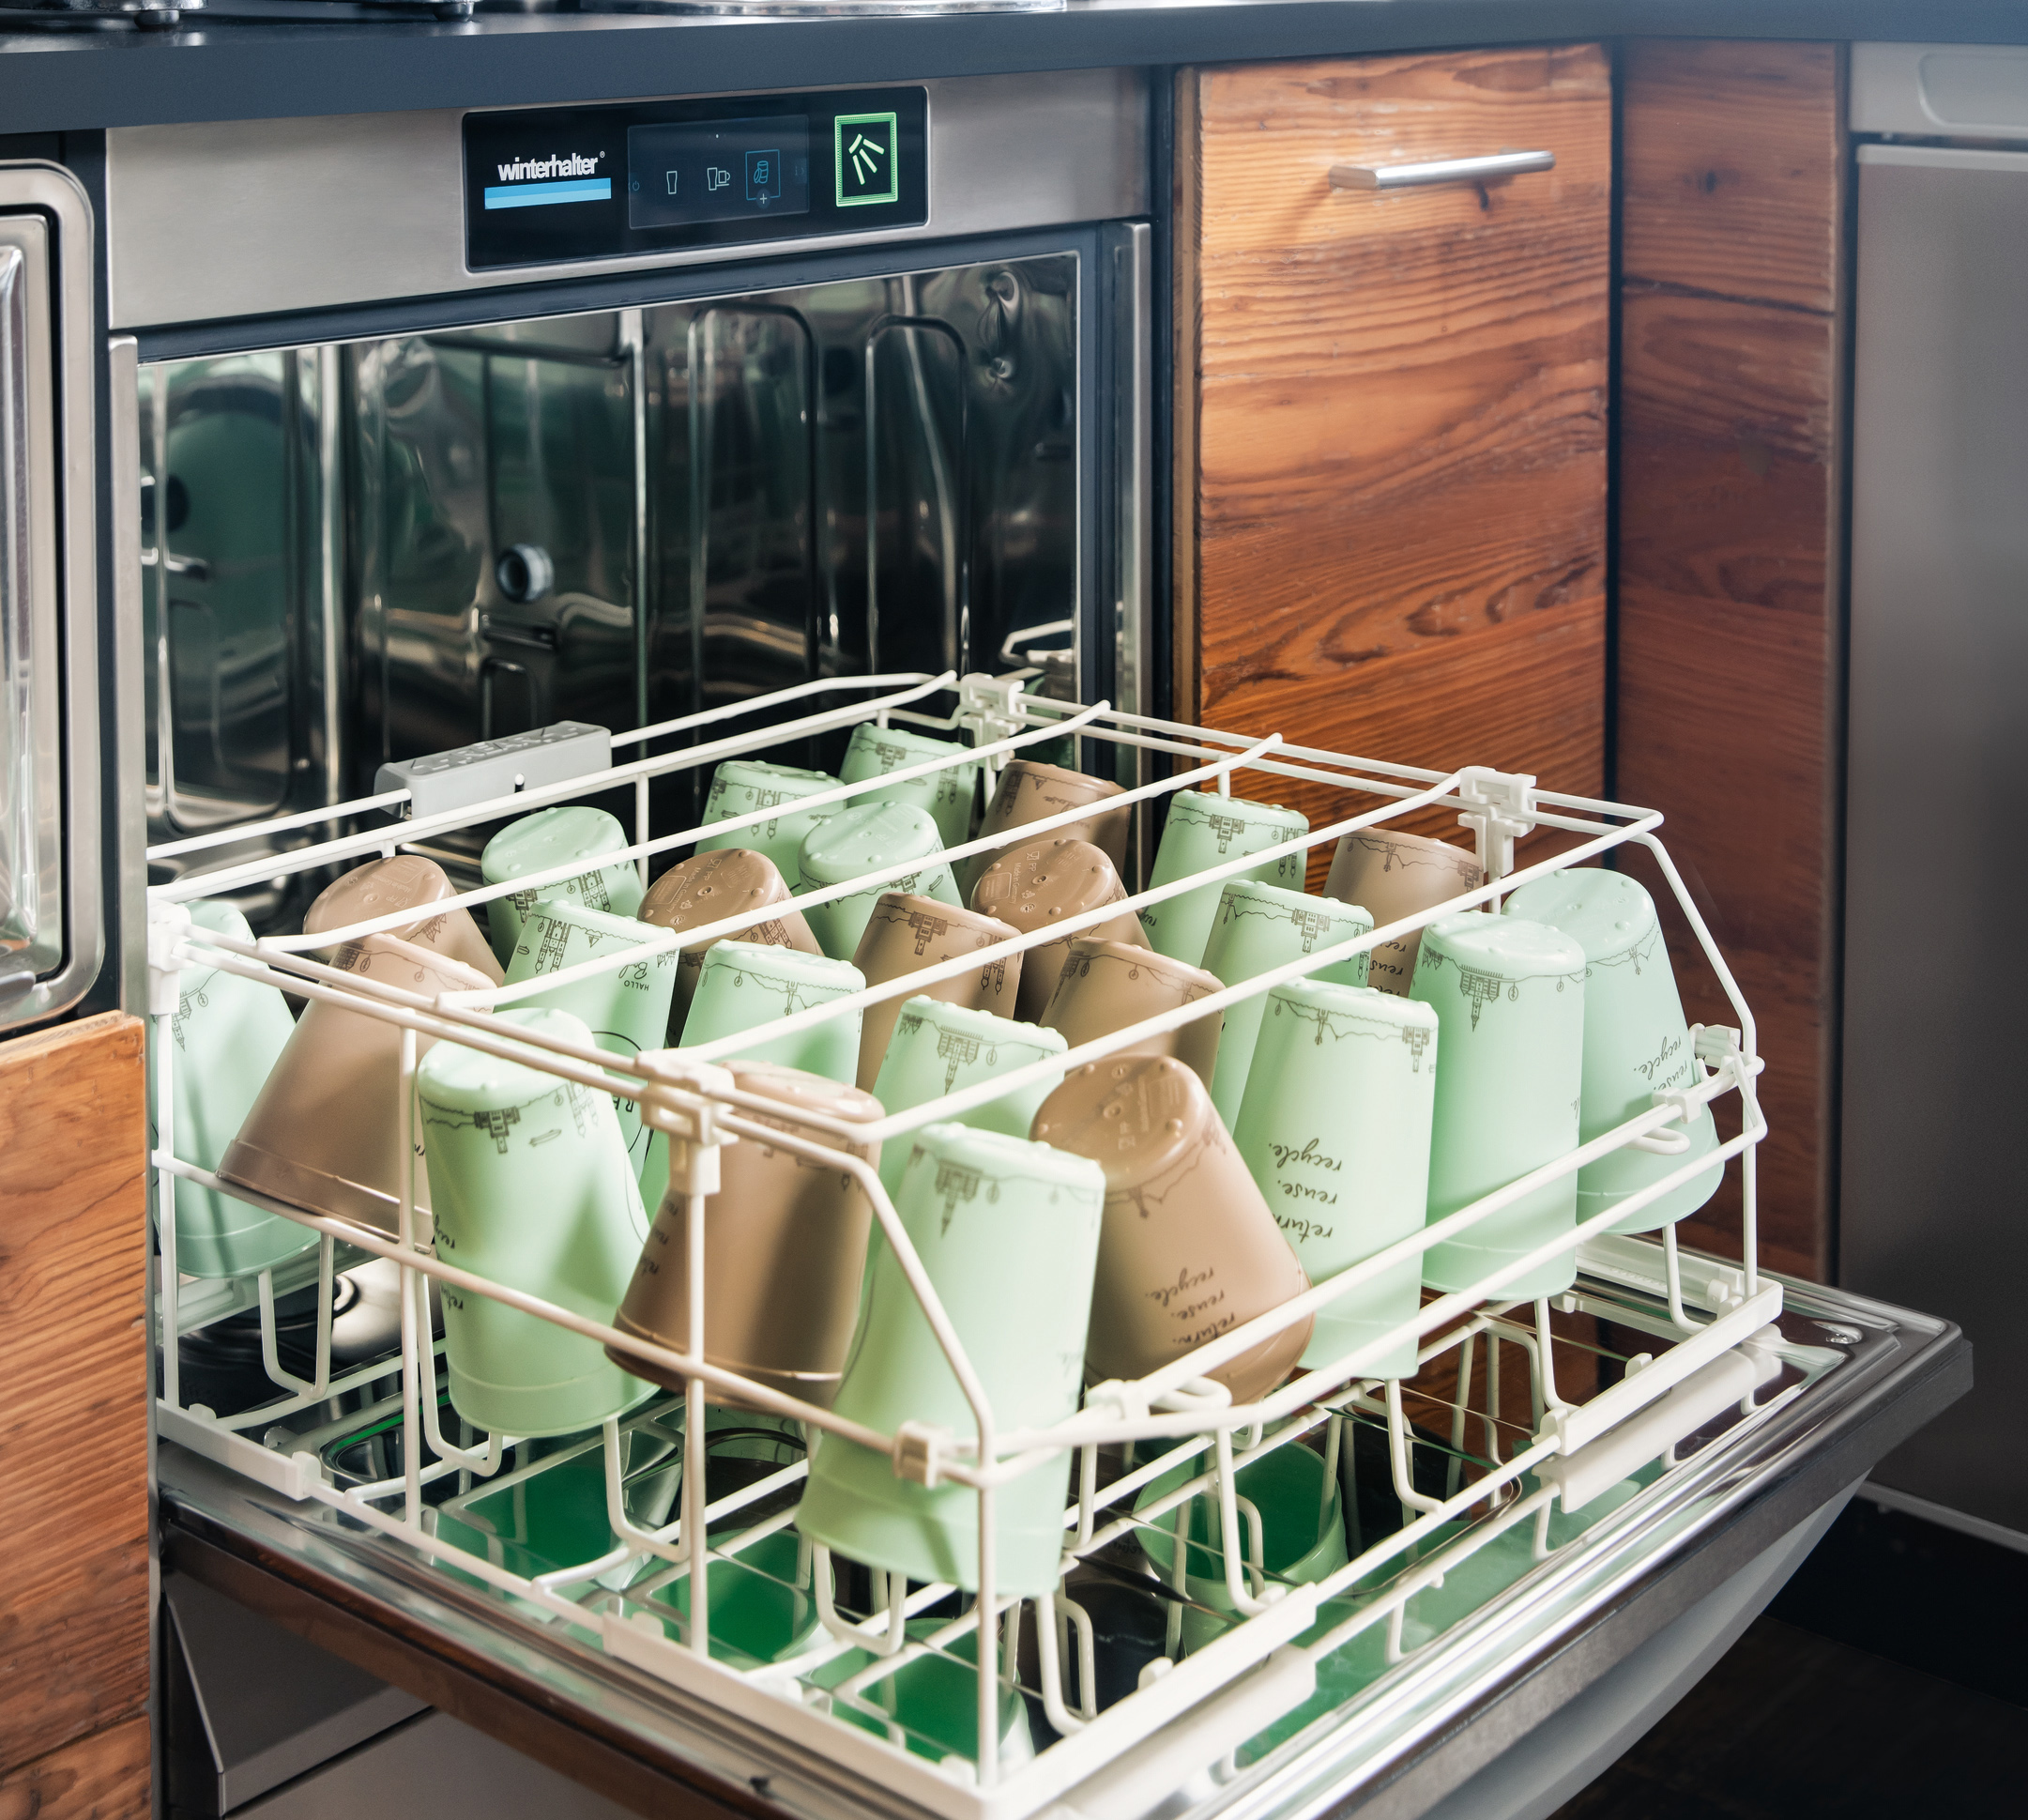 Reduce waste with Winterhalter’s new plastic cup wash system